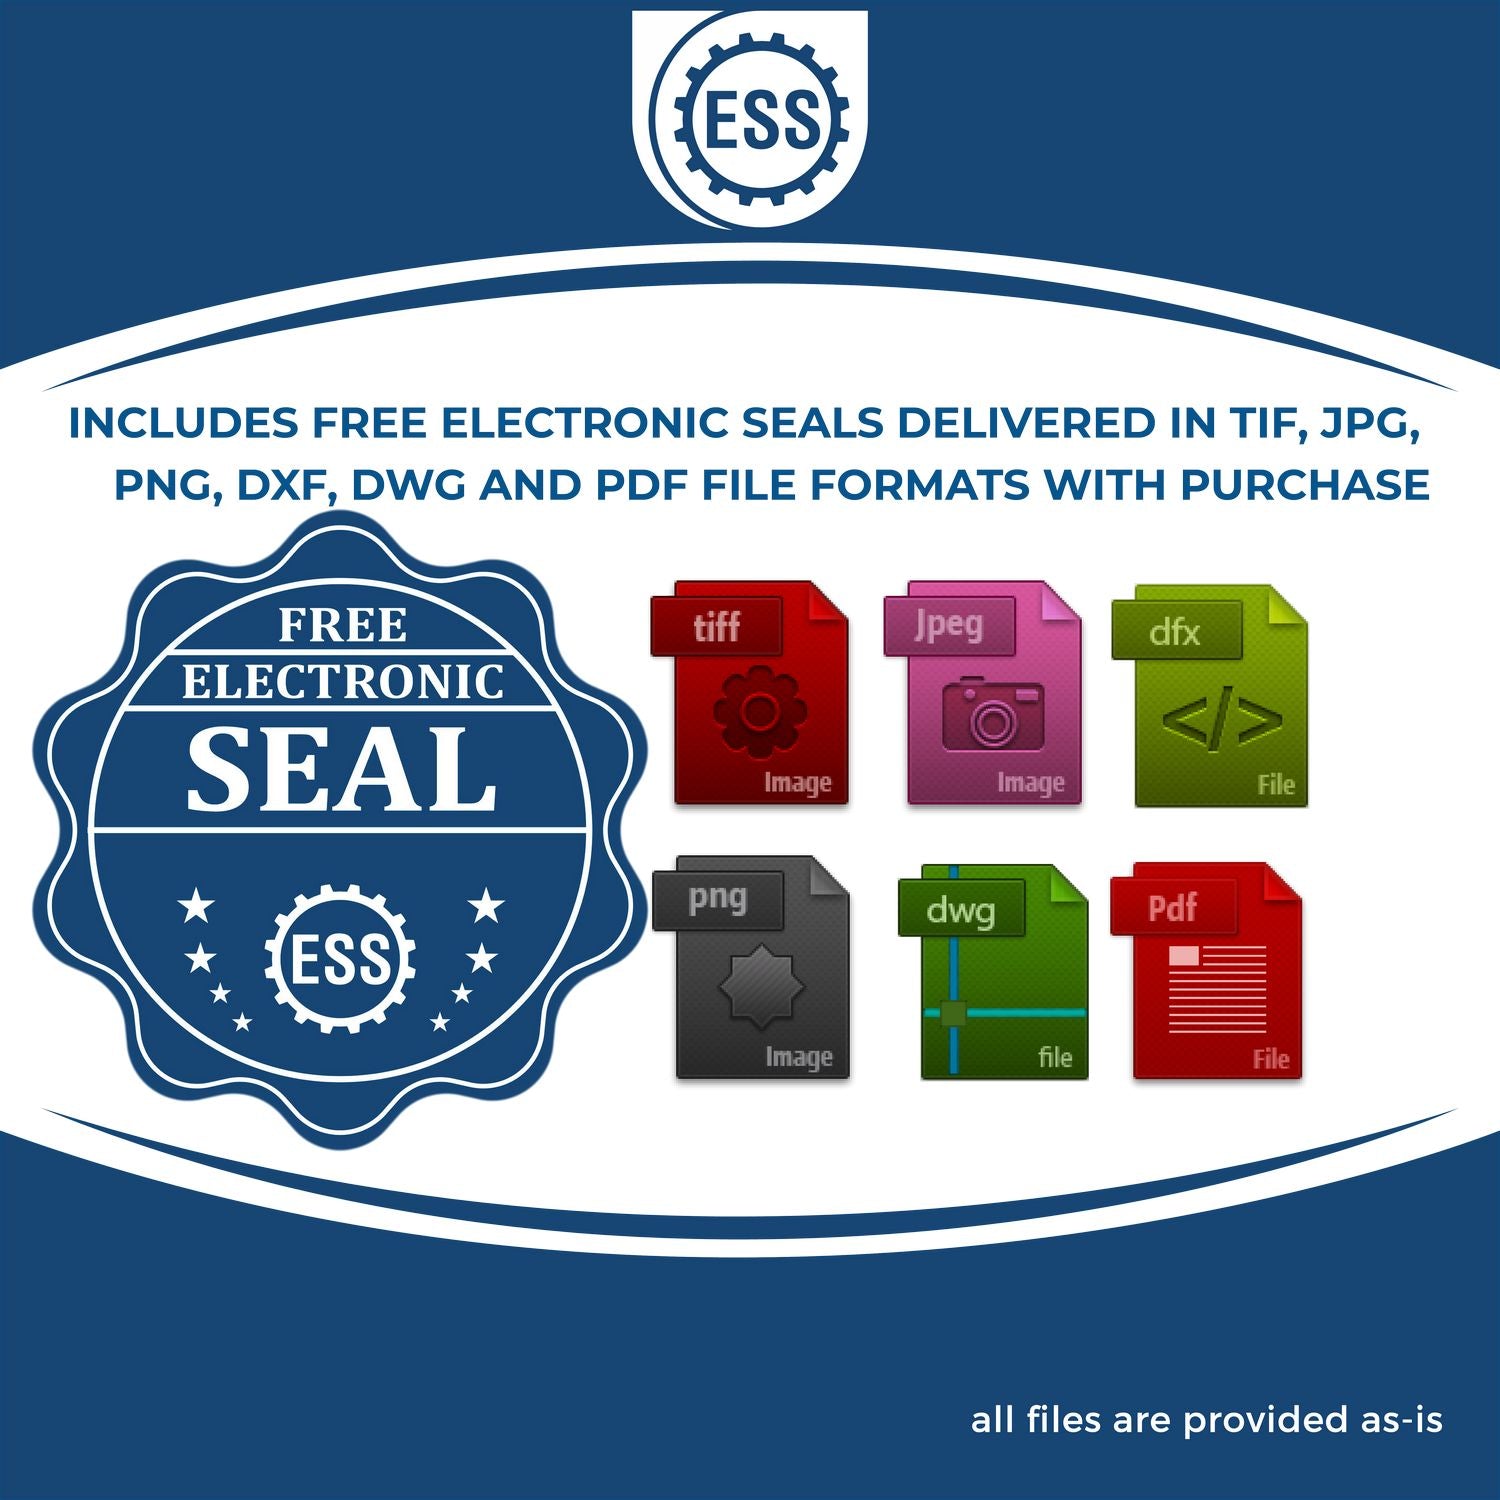 An infographic for the free electronic seal for the Self-Inking Connecticut PE Stamp illustrating the different file type icons such as DXF, DWG, TIF, JPG and PNG.